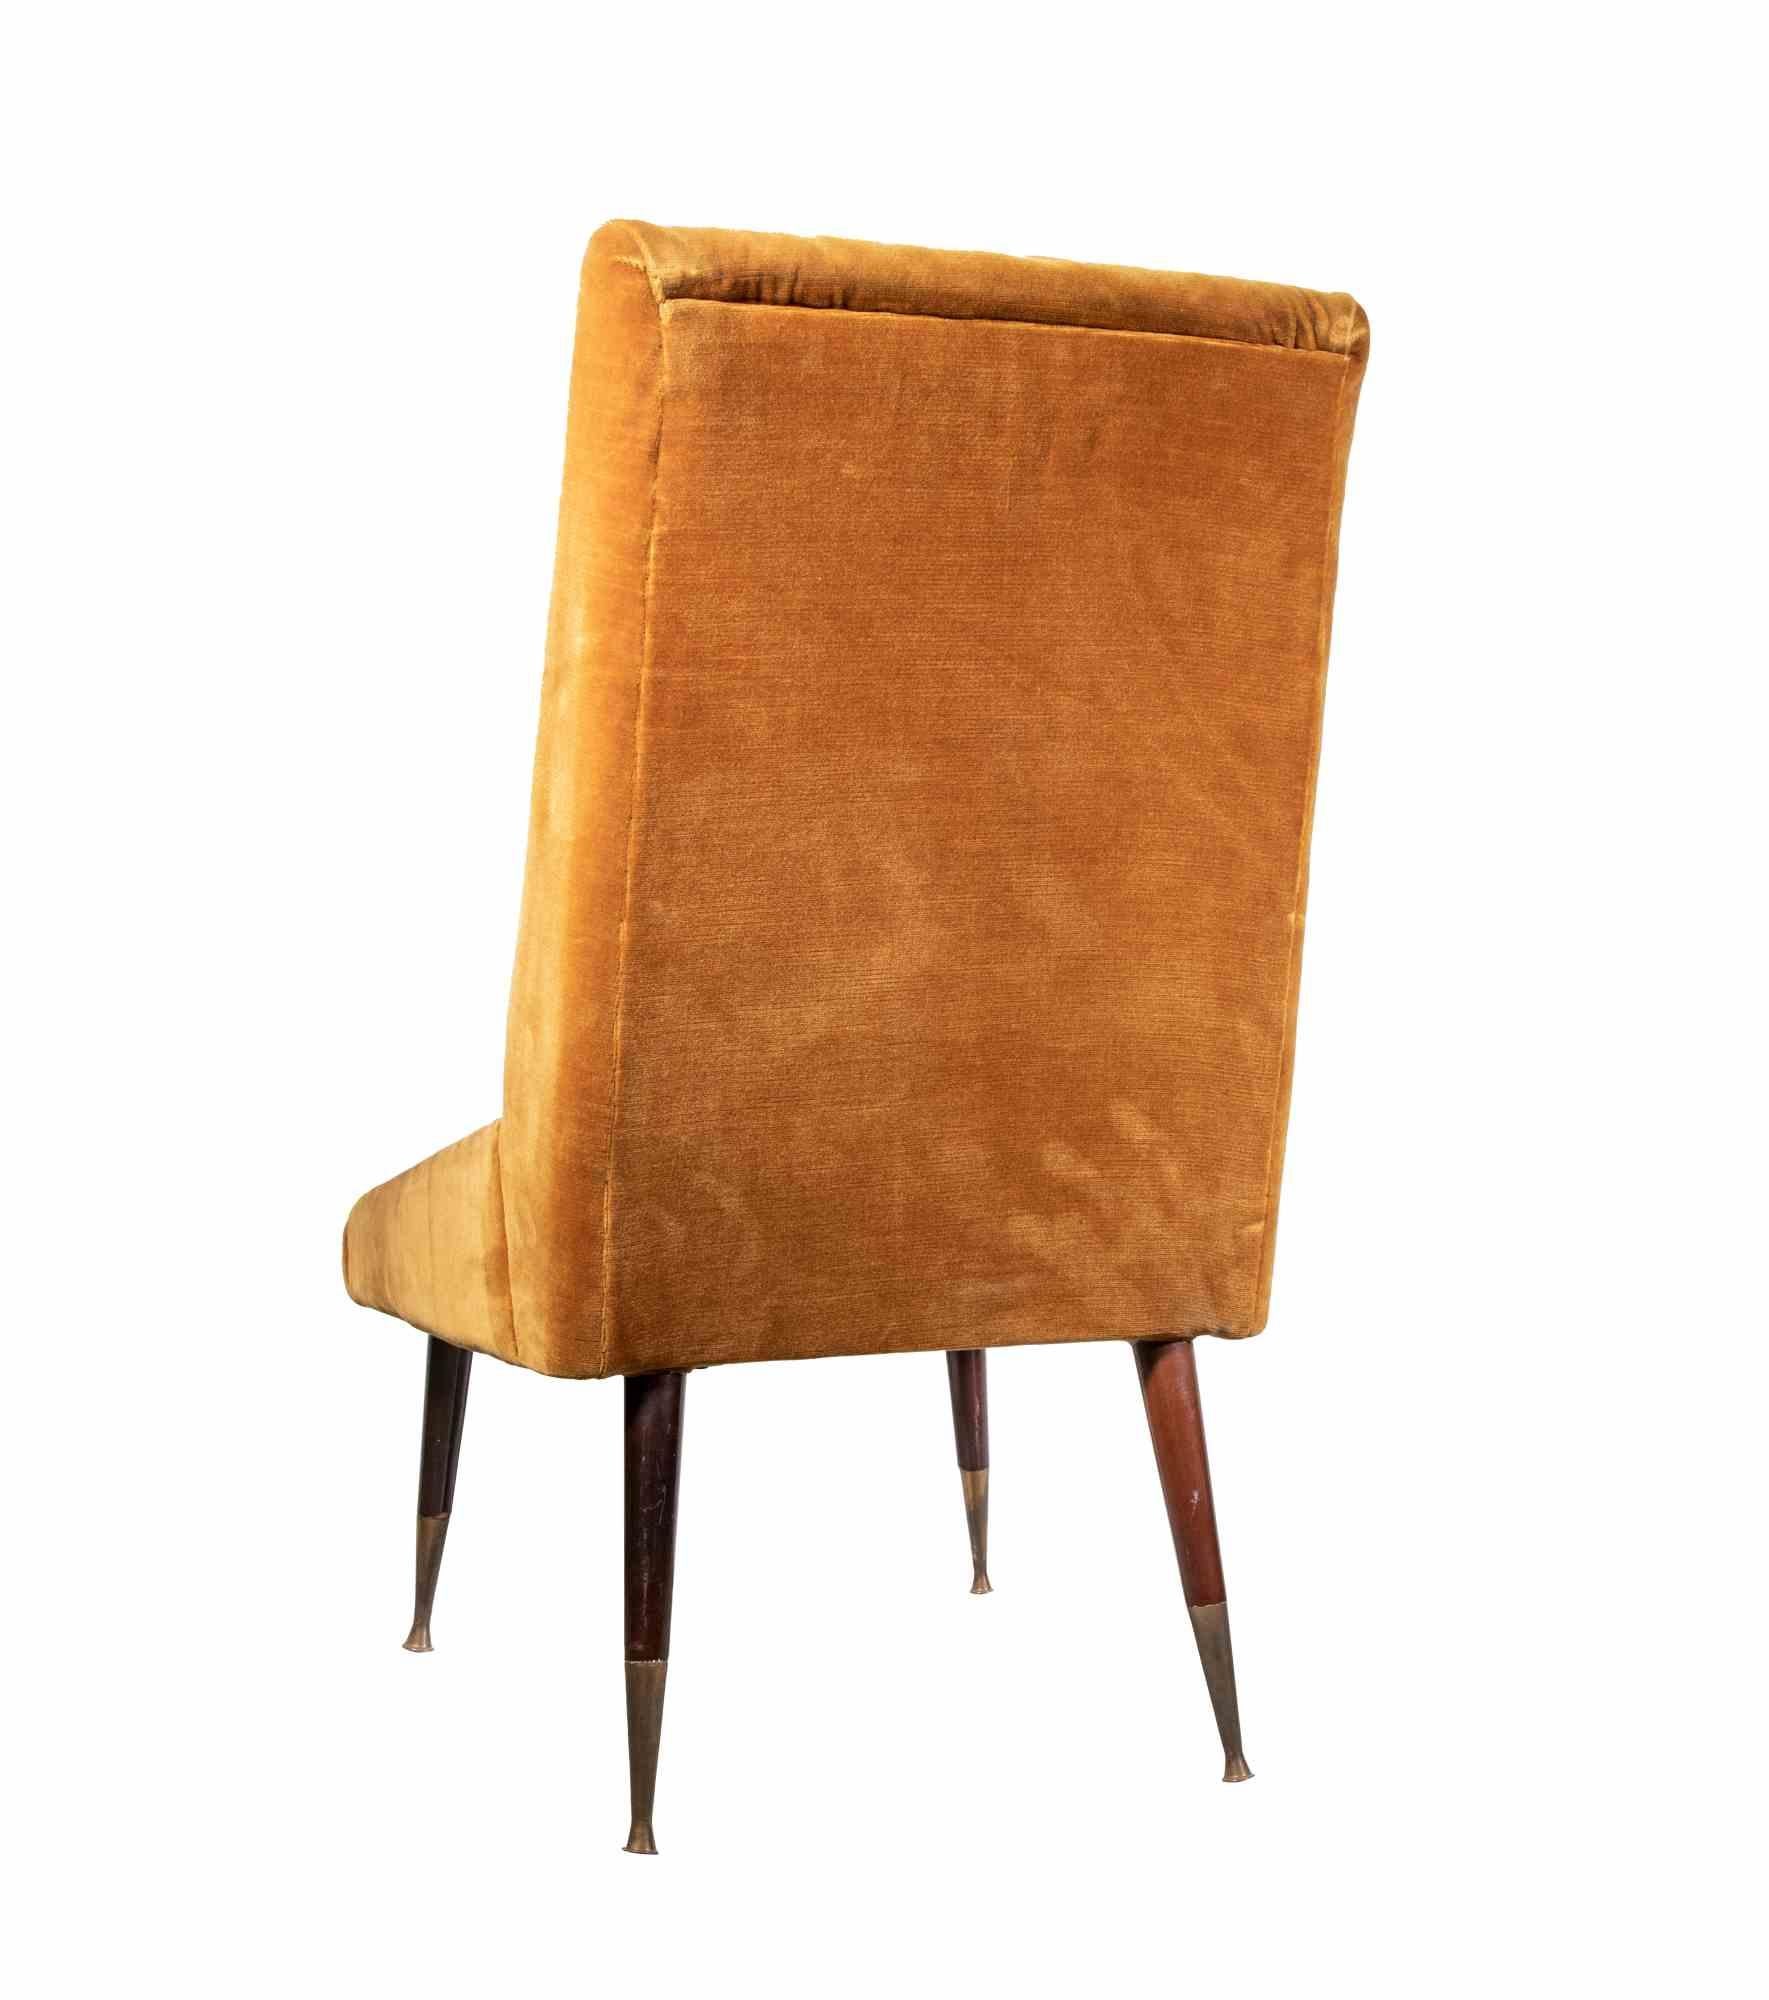 Pair of vintage Armchairs is a contemporary design item realized by Italian Production manufacturer in the 1950s.

A pair of ocher colored armchair realized in wood, brass and Velvet. 

Very good condition.

A vintage object perfect to decor